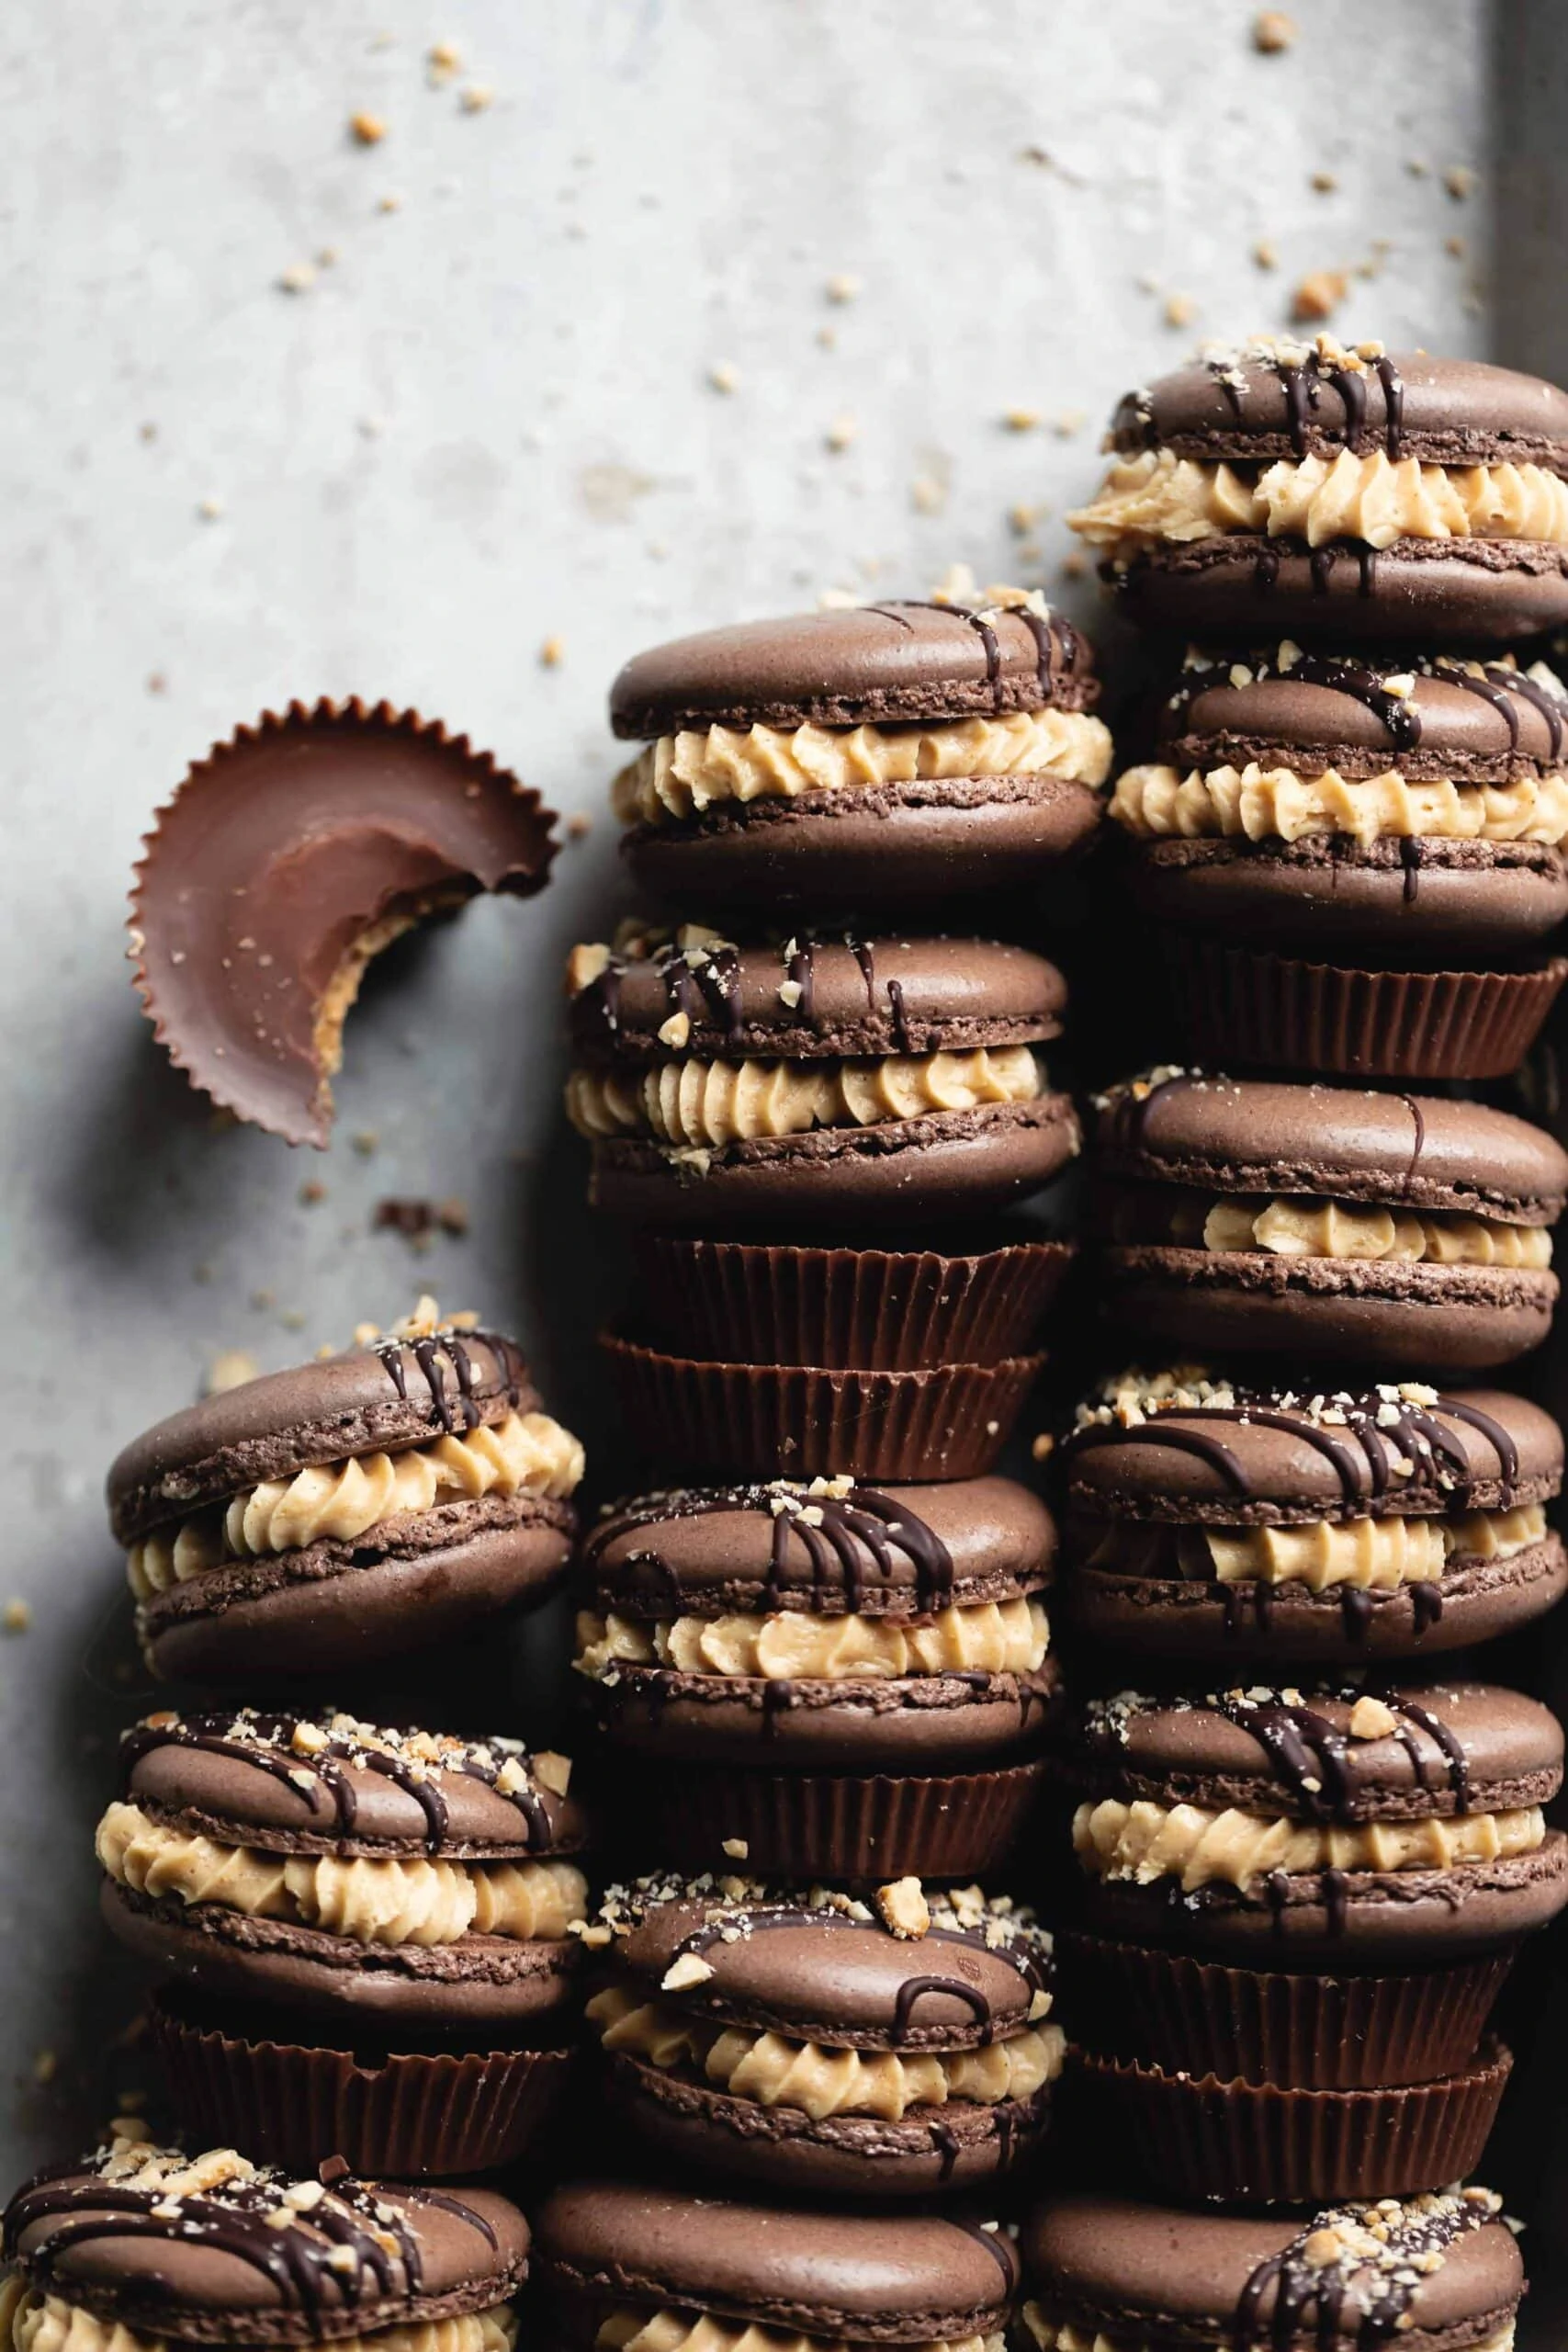 easy reese's macarons aka chocolate peanut butter macarons with a sweet peanut butter filling